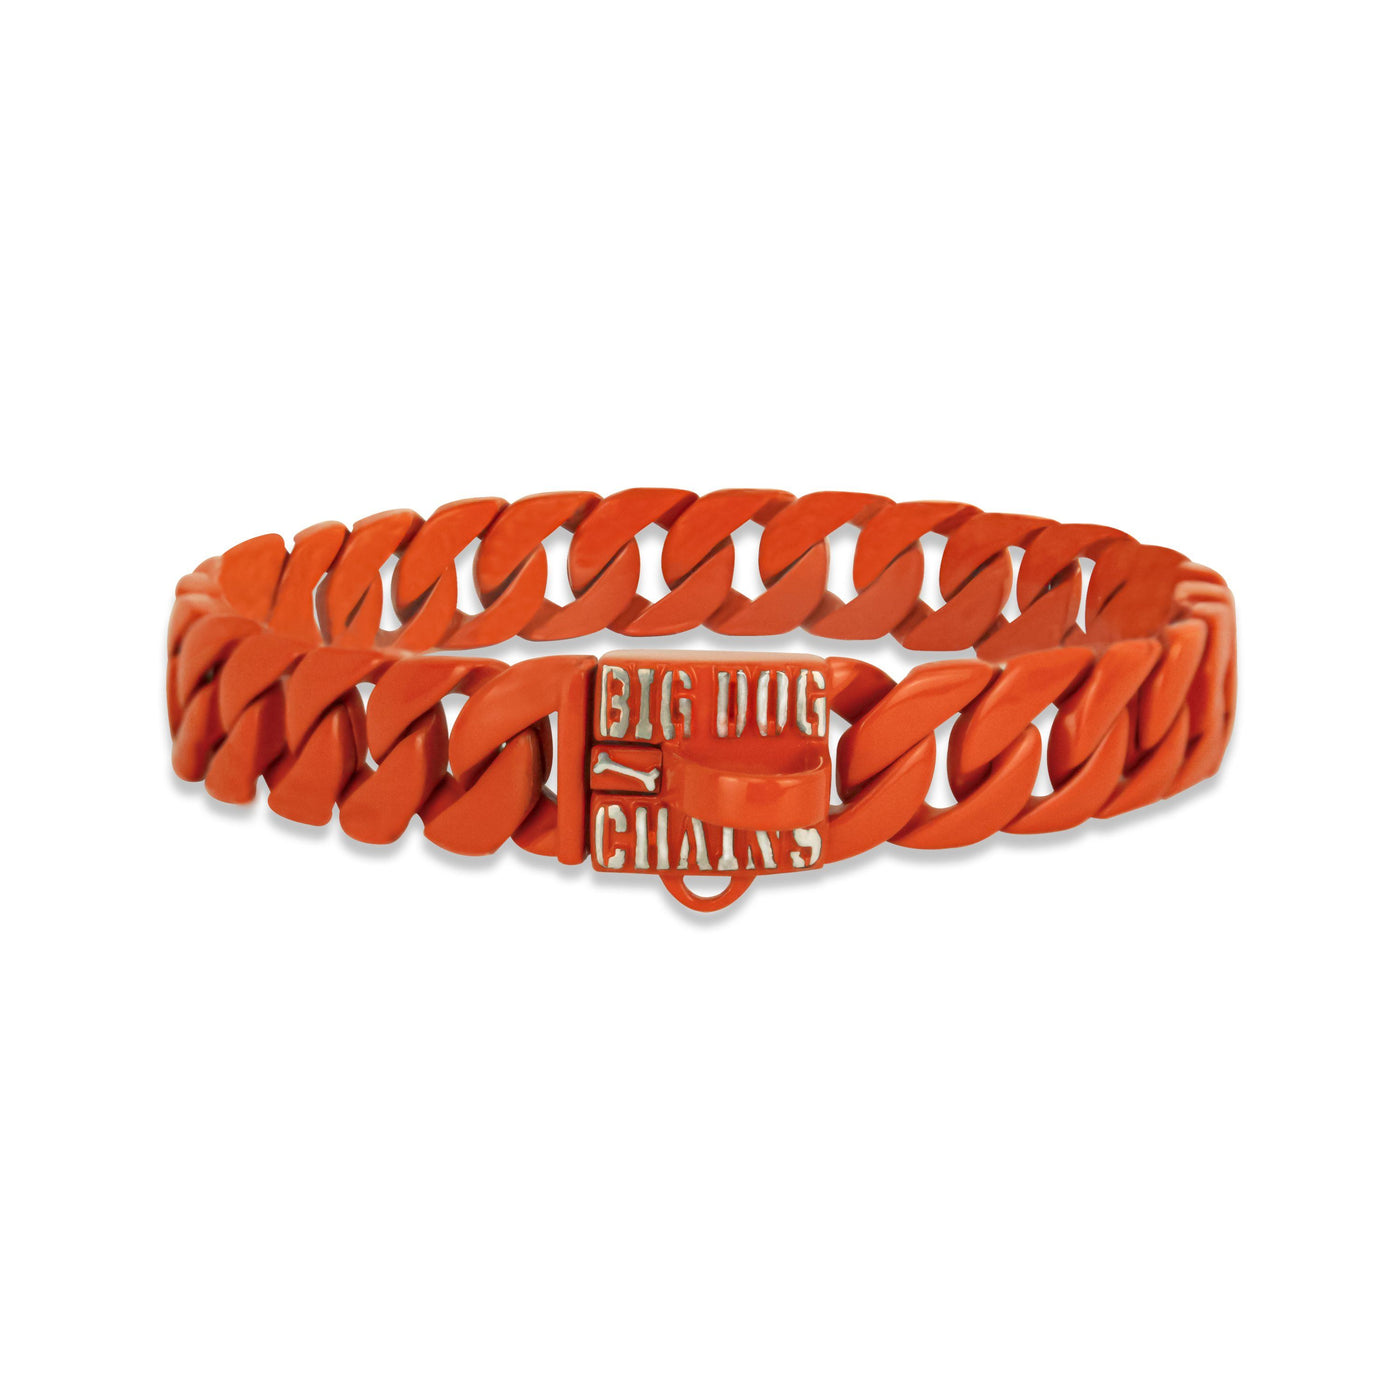 THE_FIREBALL_Dog_Collar_Cuban_Link_Designed_For_Large_Medium_Size_Dog_Breed_with_a_Very_Strong_and_Patented_Clasp_Design_Perfect_for_Large_Pit_Bull_Doberman_Rottweiler_and_more_BIG_D_ORANGE_COLOR_COLLAR_LUXURY_COLLAR